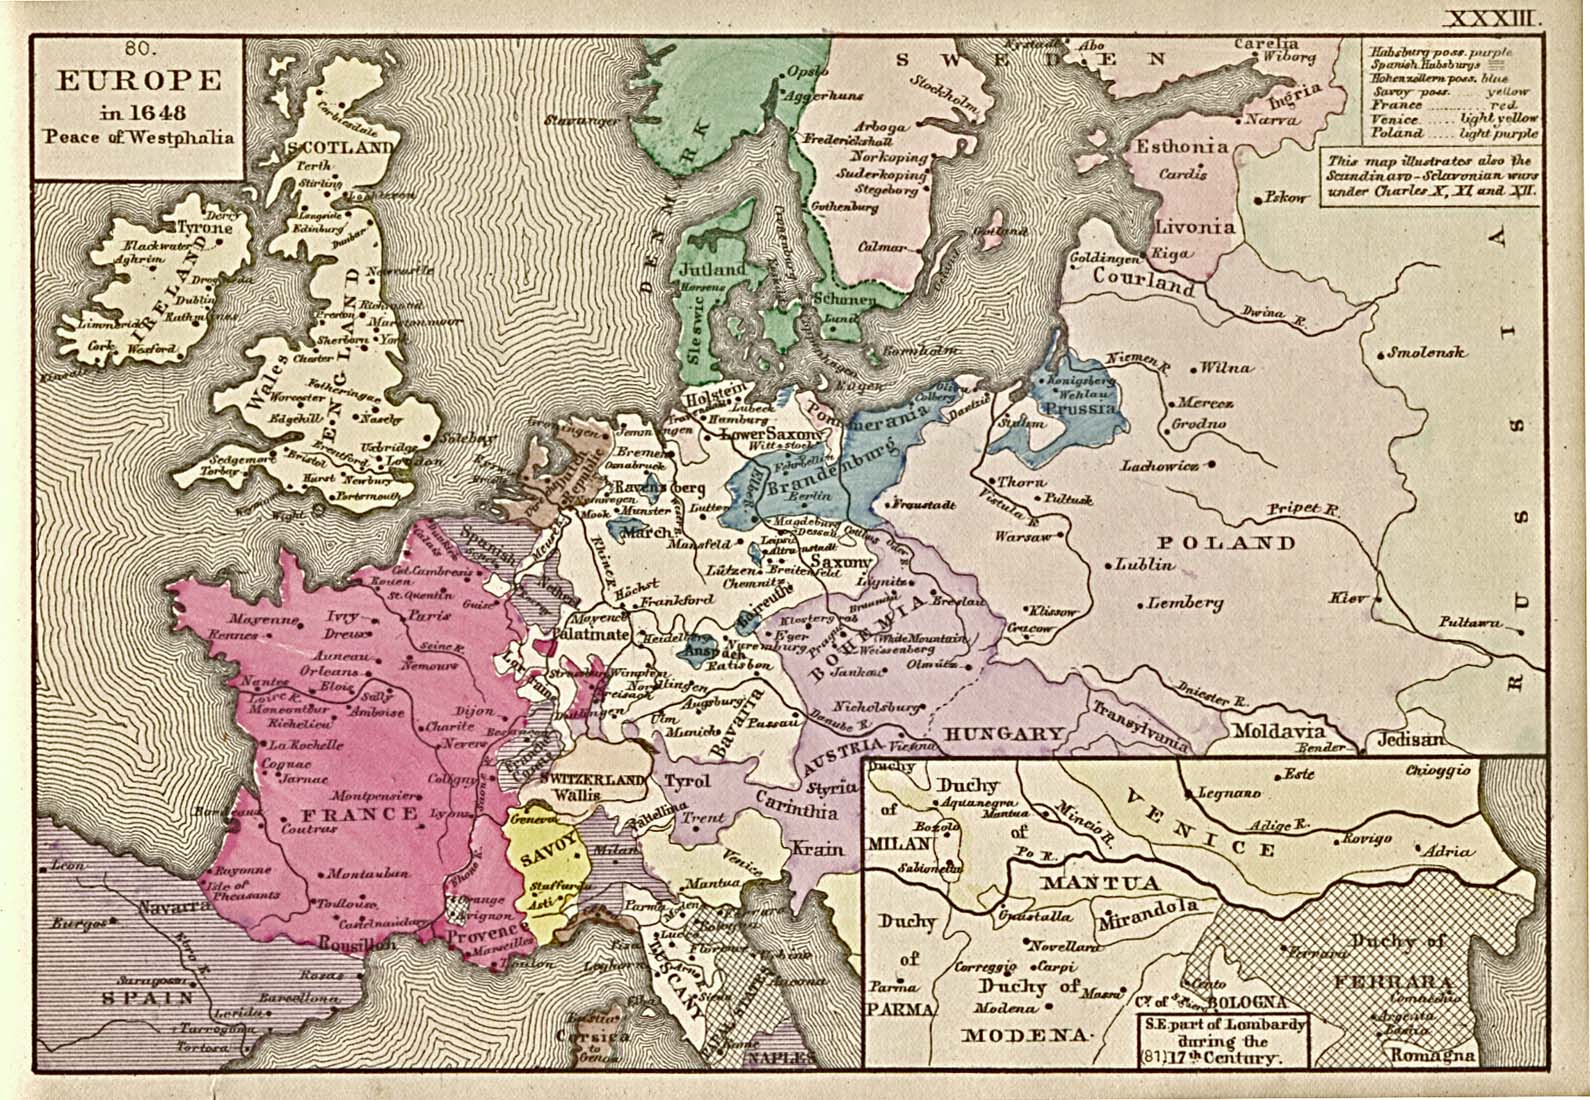 Europe after the Peace of Westphalia (1648)